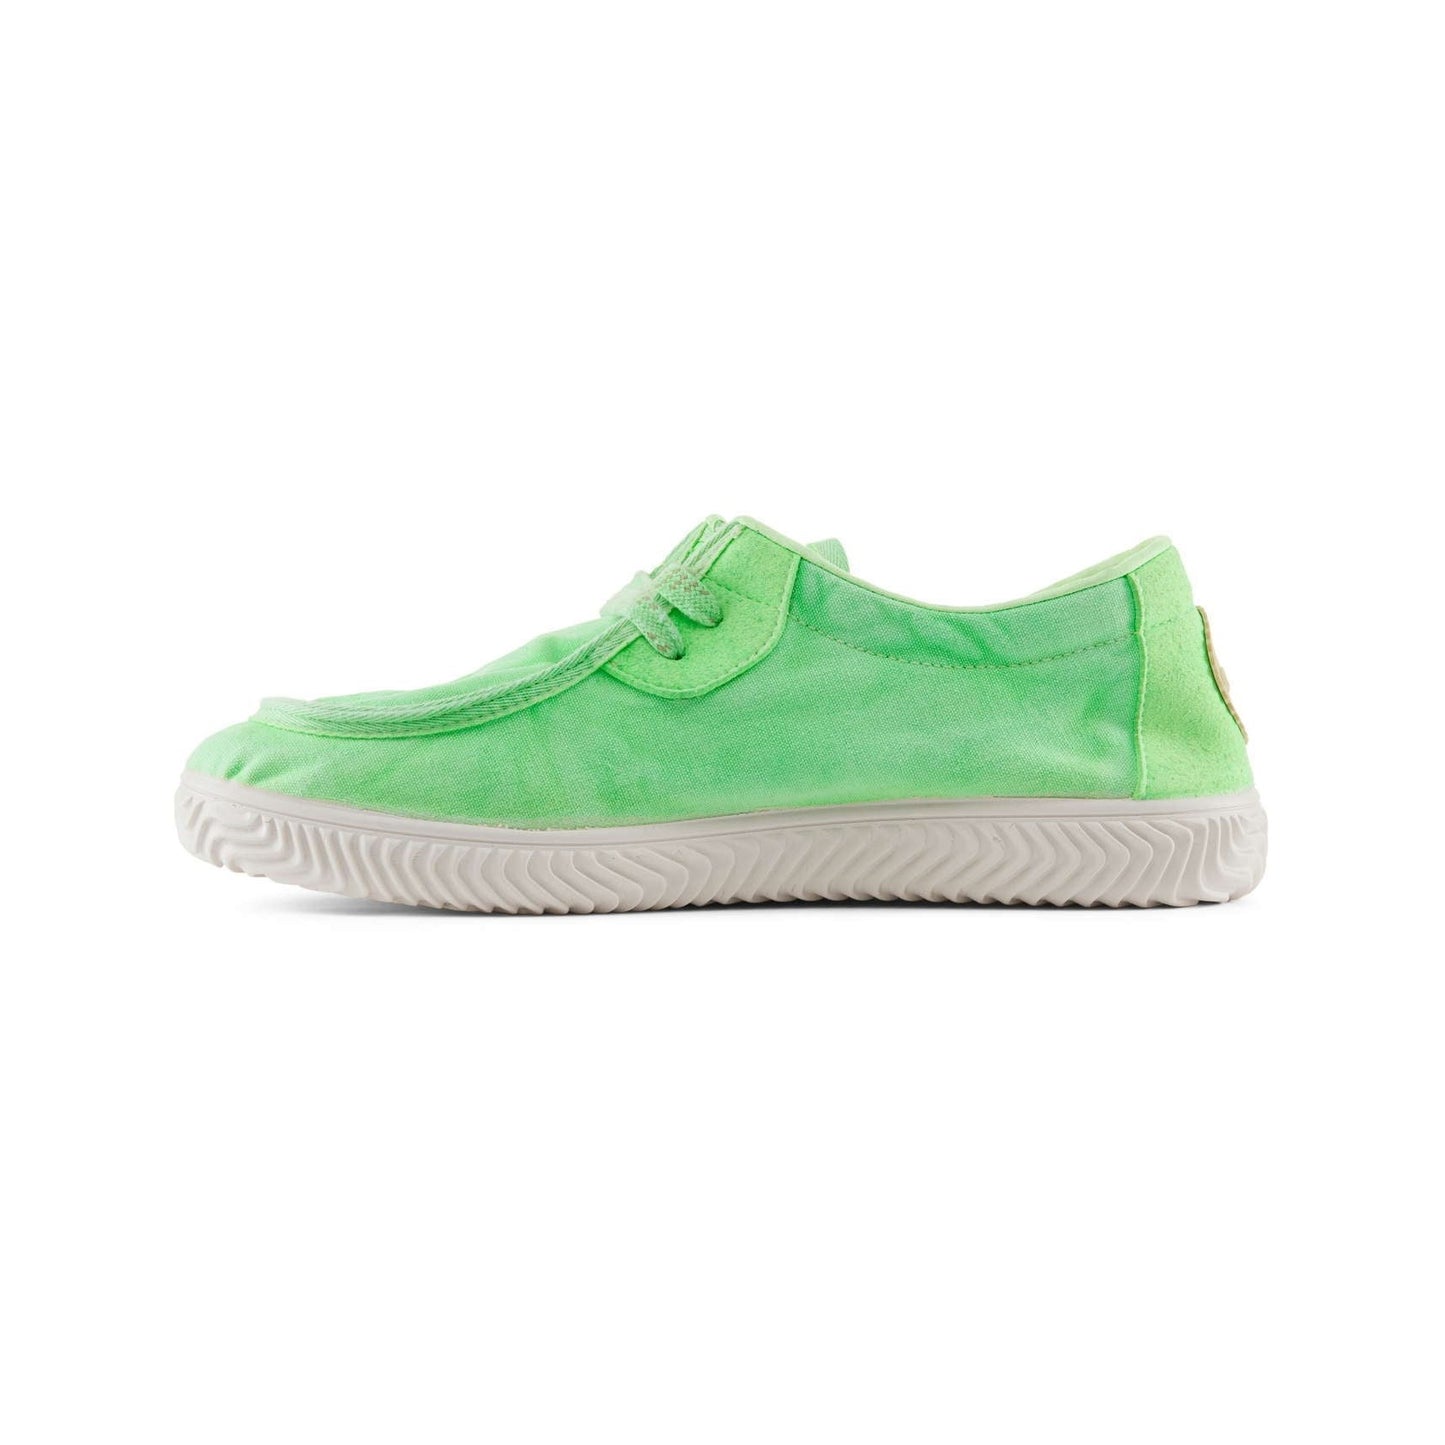 DUUO | WALLABEE MUJER | ONA WALABY WASHED 049 (VERDE FLUOR 79 ) | VERDE